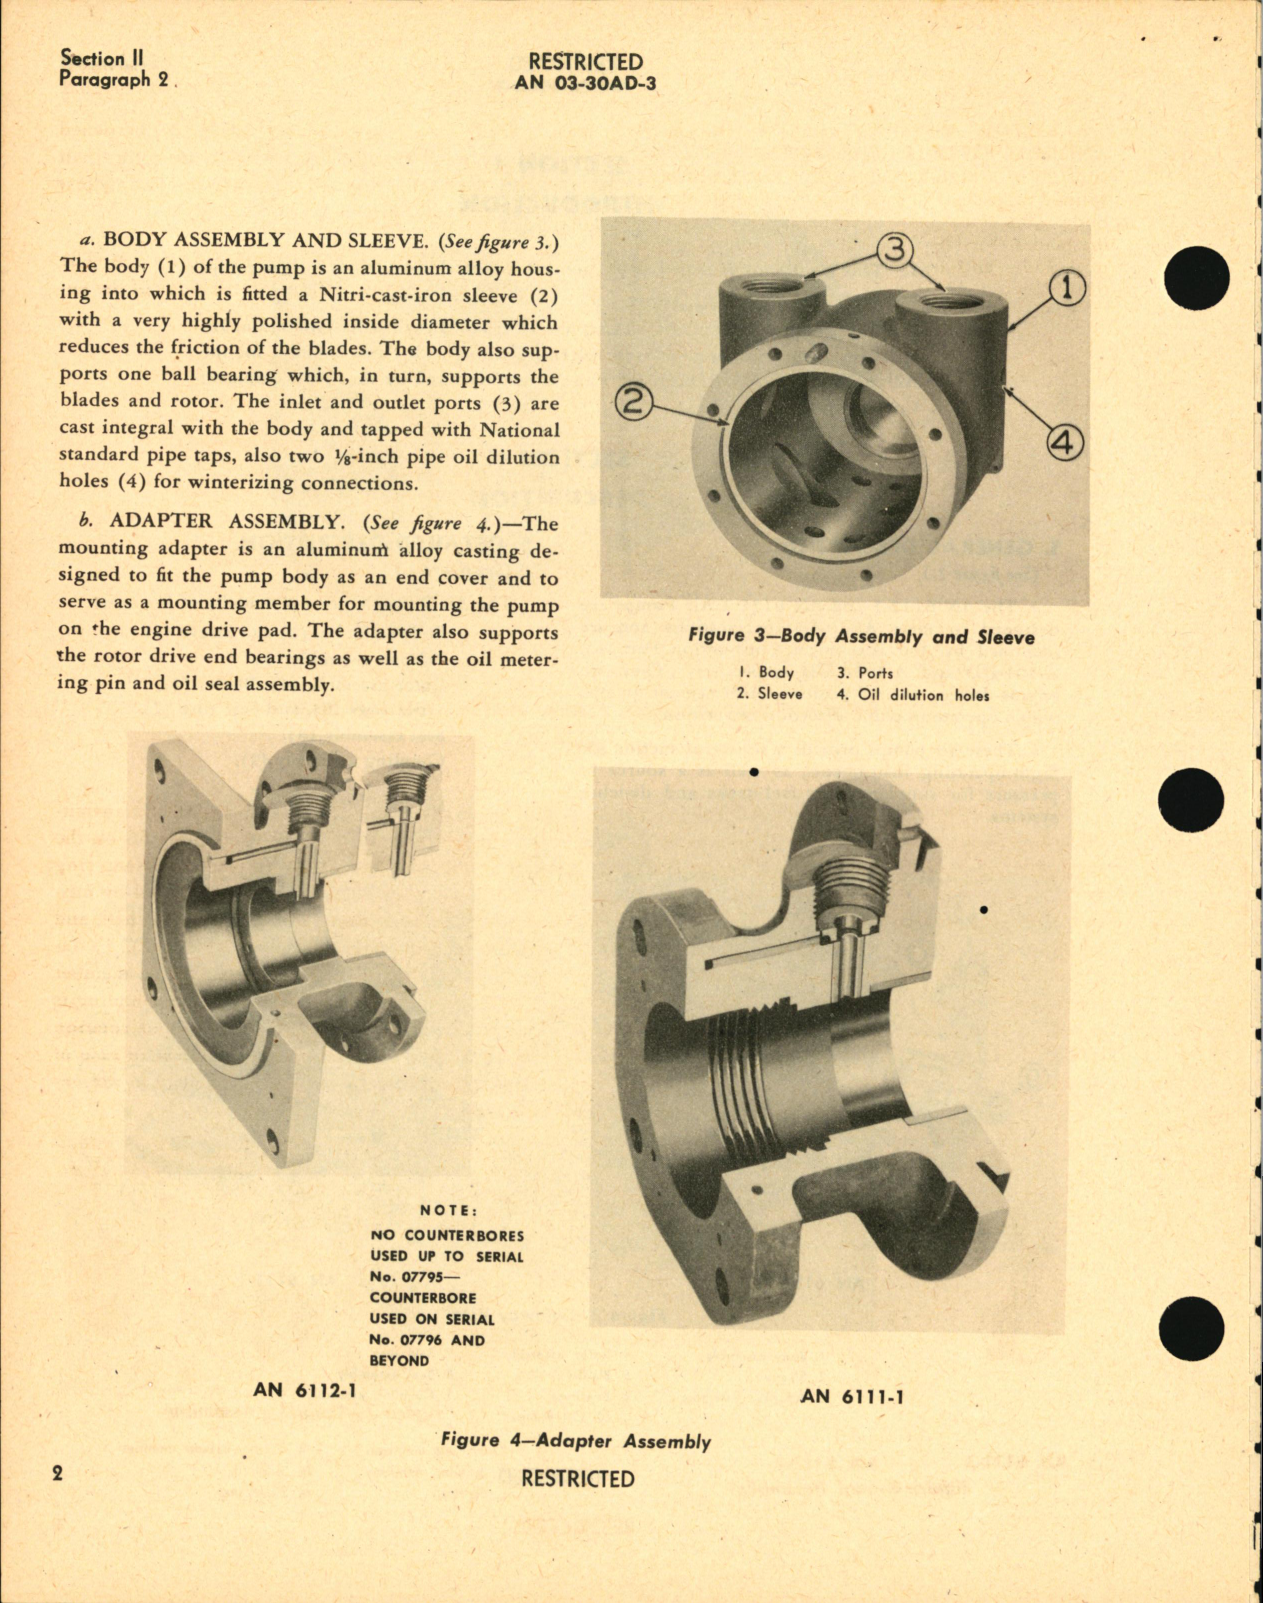 Sample page 6 from AirCorps Library document: Operation, Service and Overhaul Instructions with Parts Catalog for Air Pumps